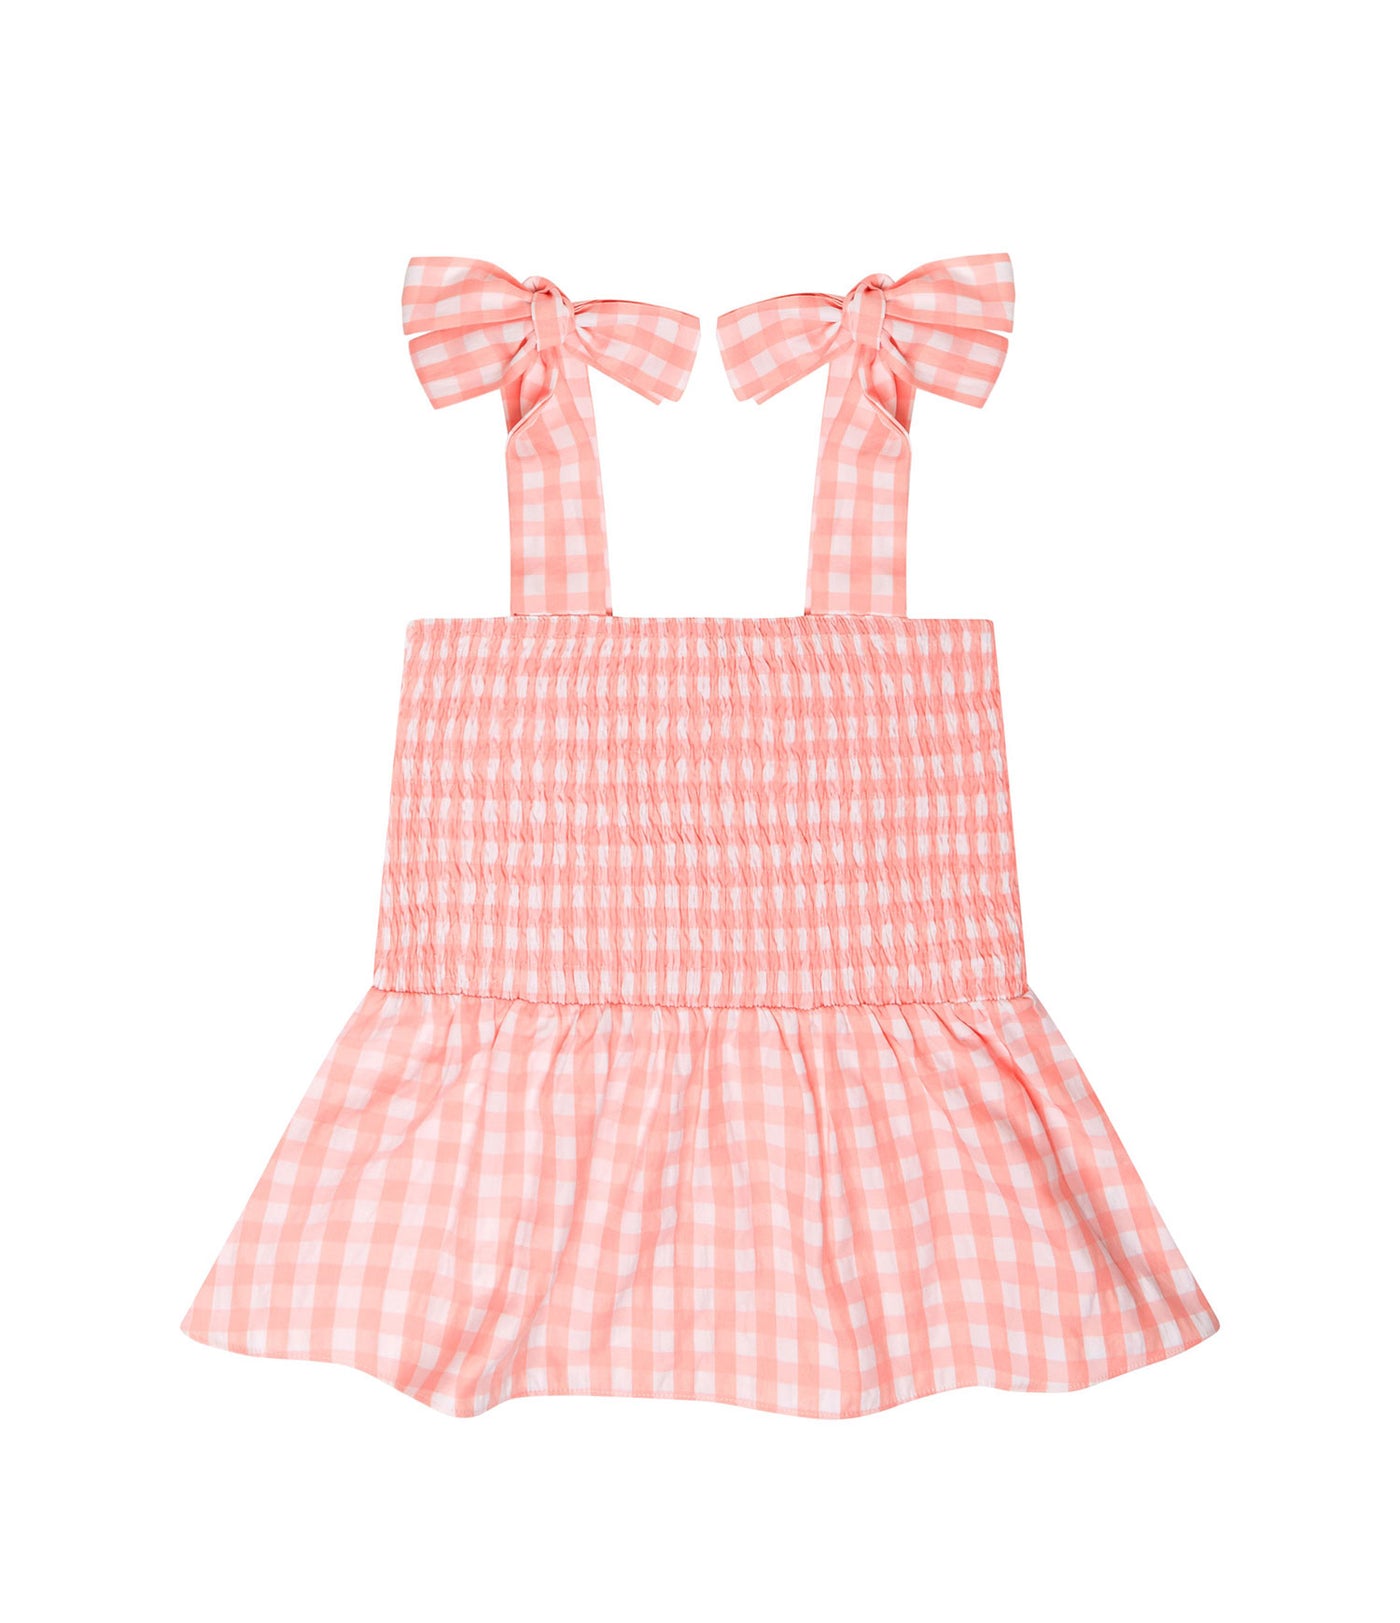 Pink and white gingham top